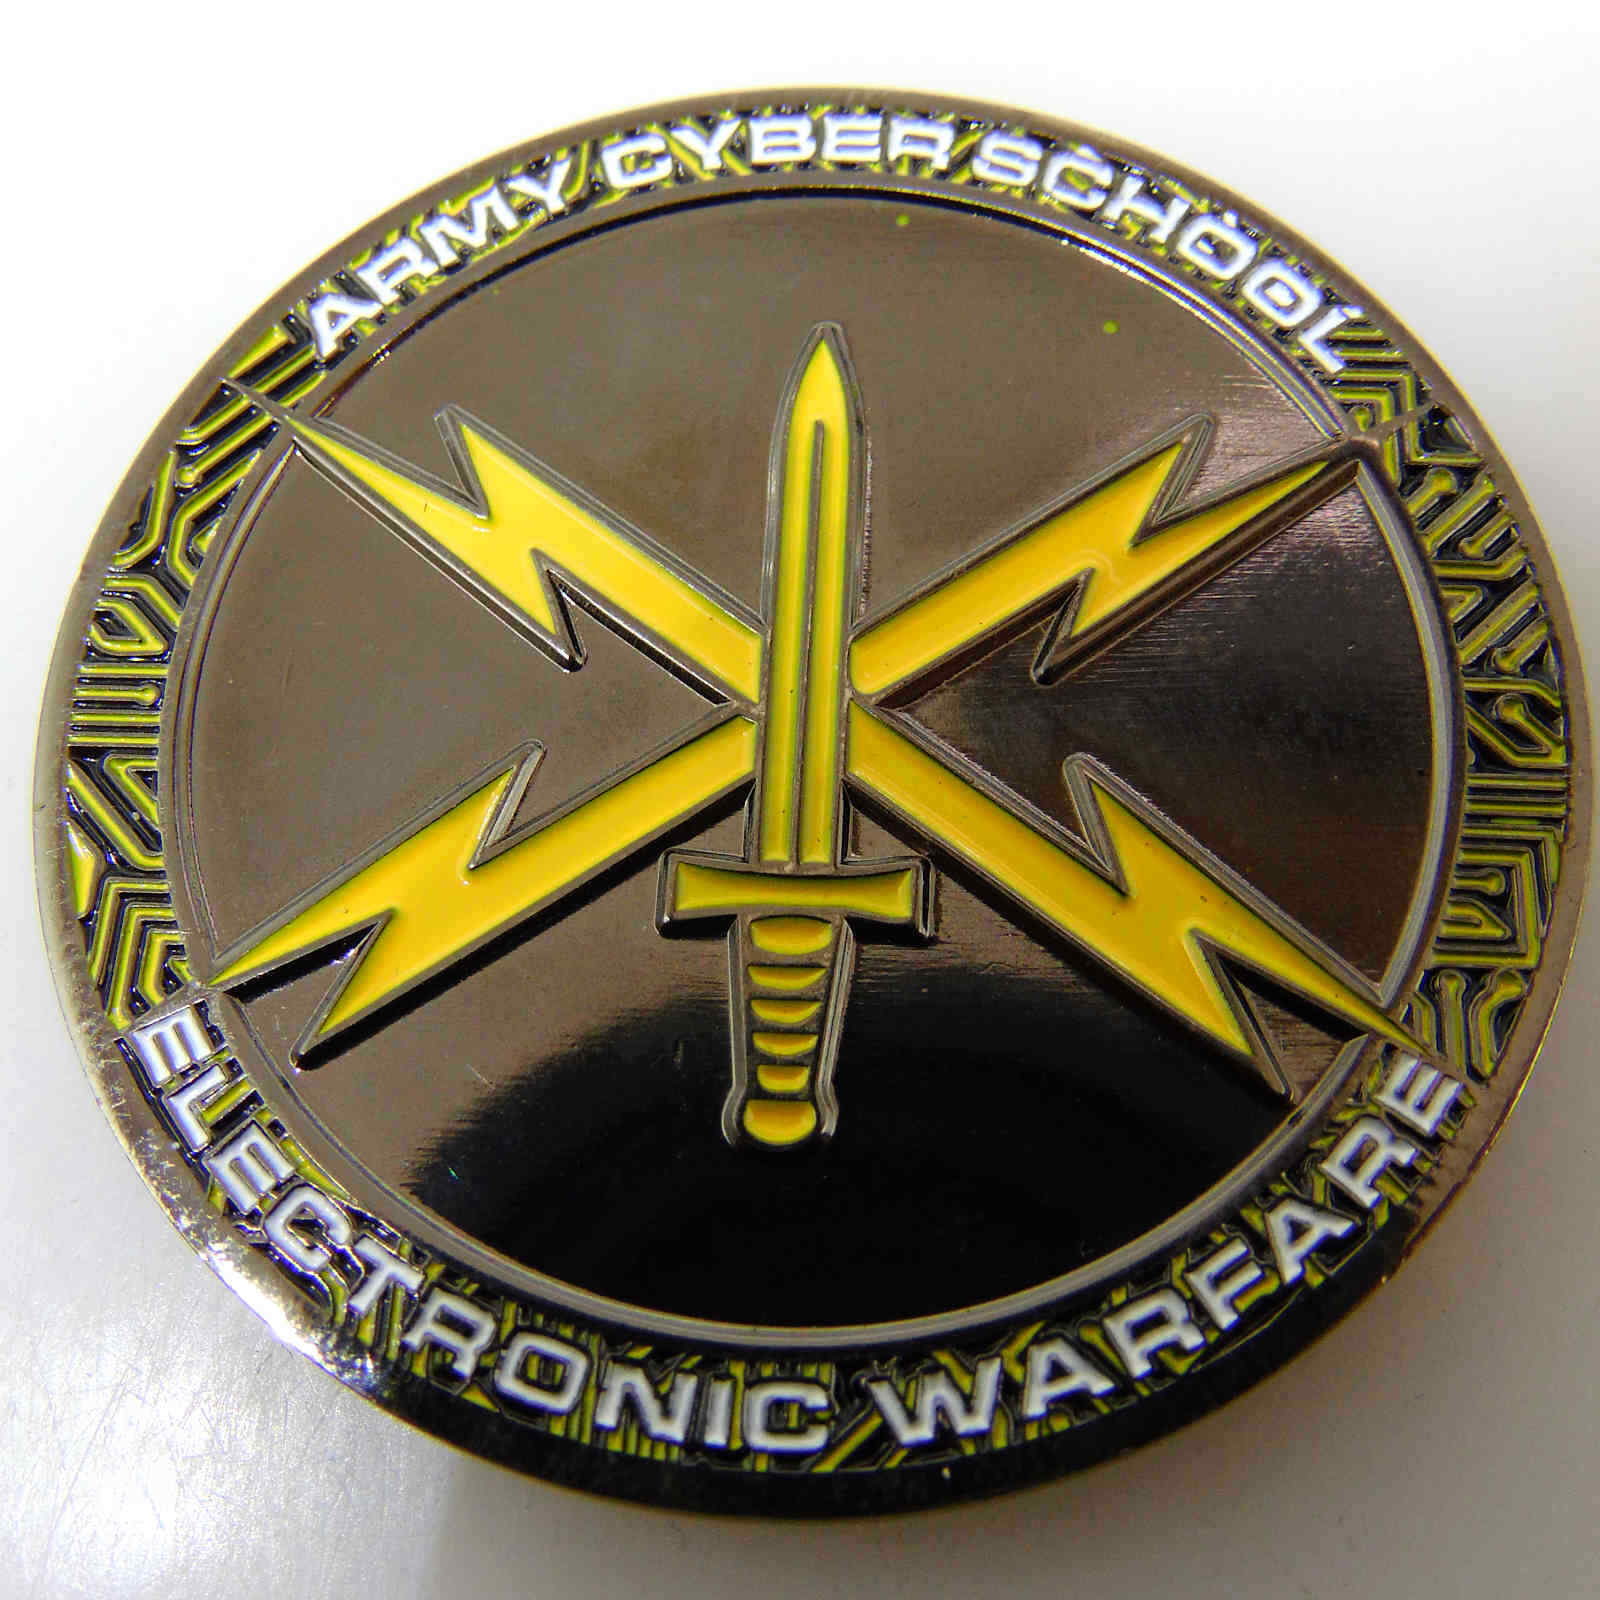 ARMY CYBER SCHOOL ELECTRONIC WARFARE 17OB WOBC CLASS OF 2021 CHALLENGE COIN